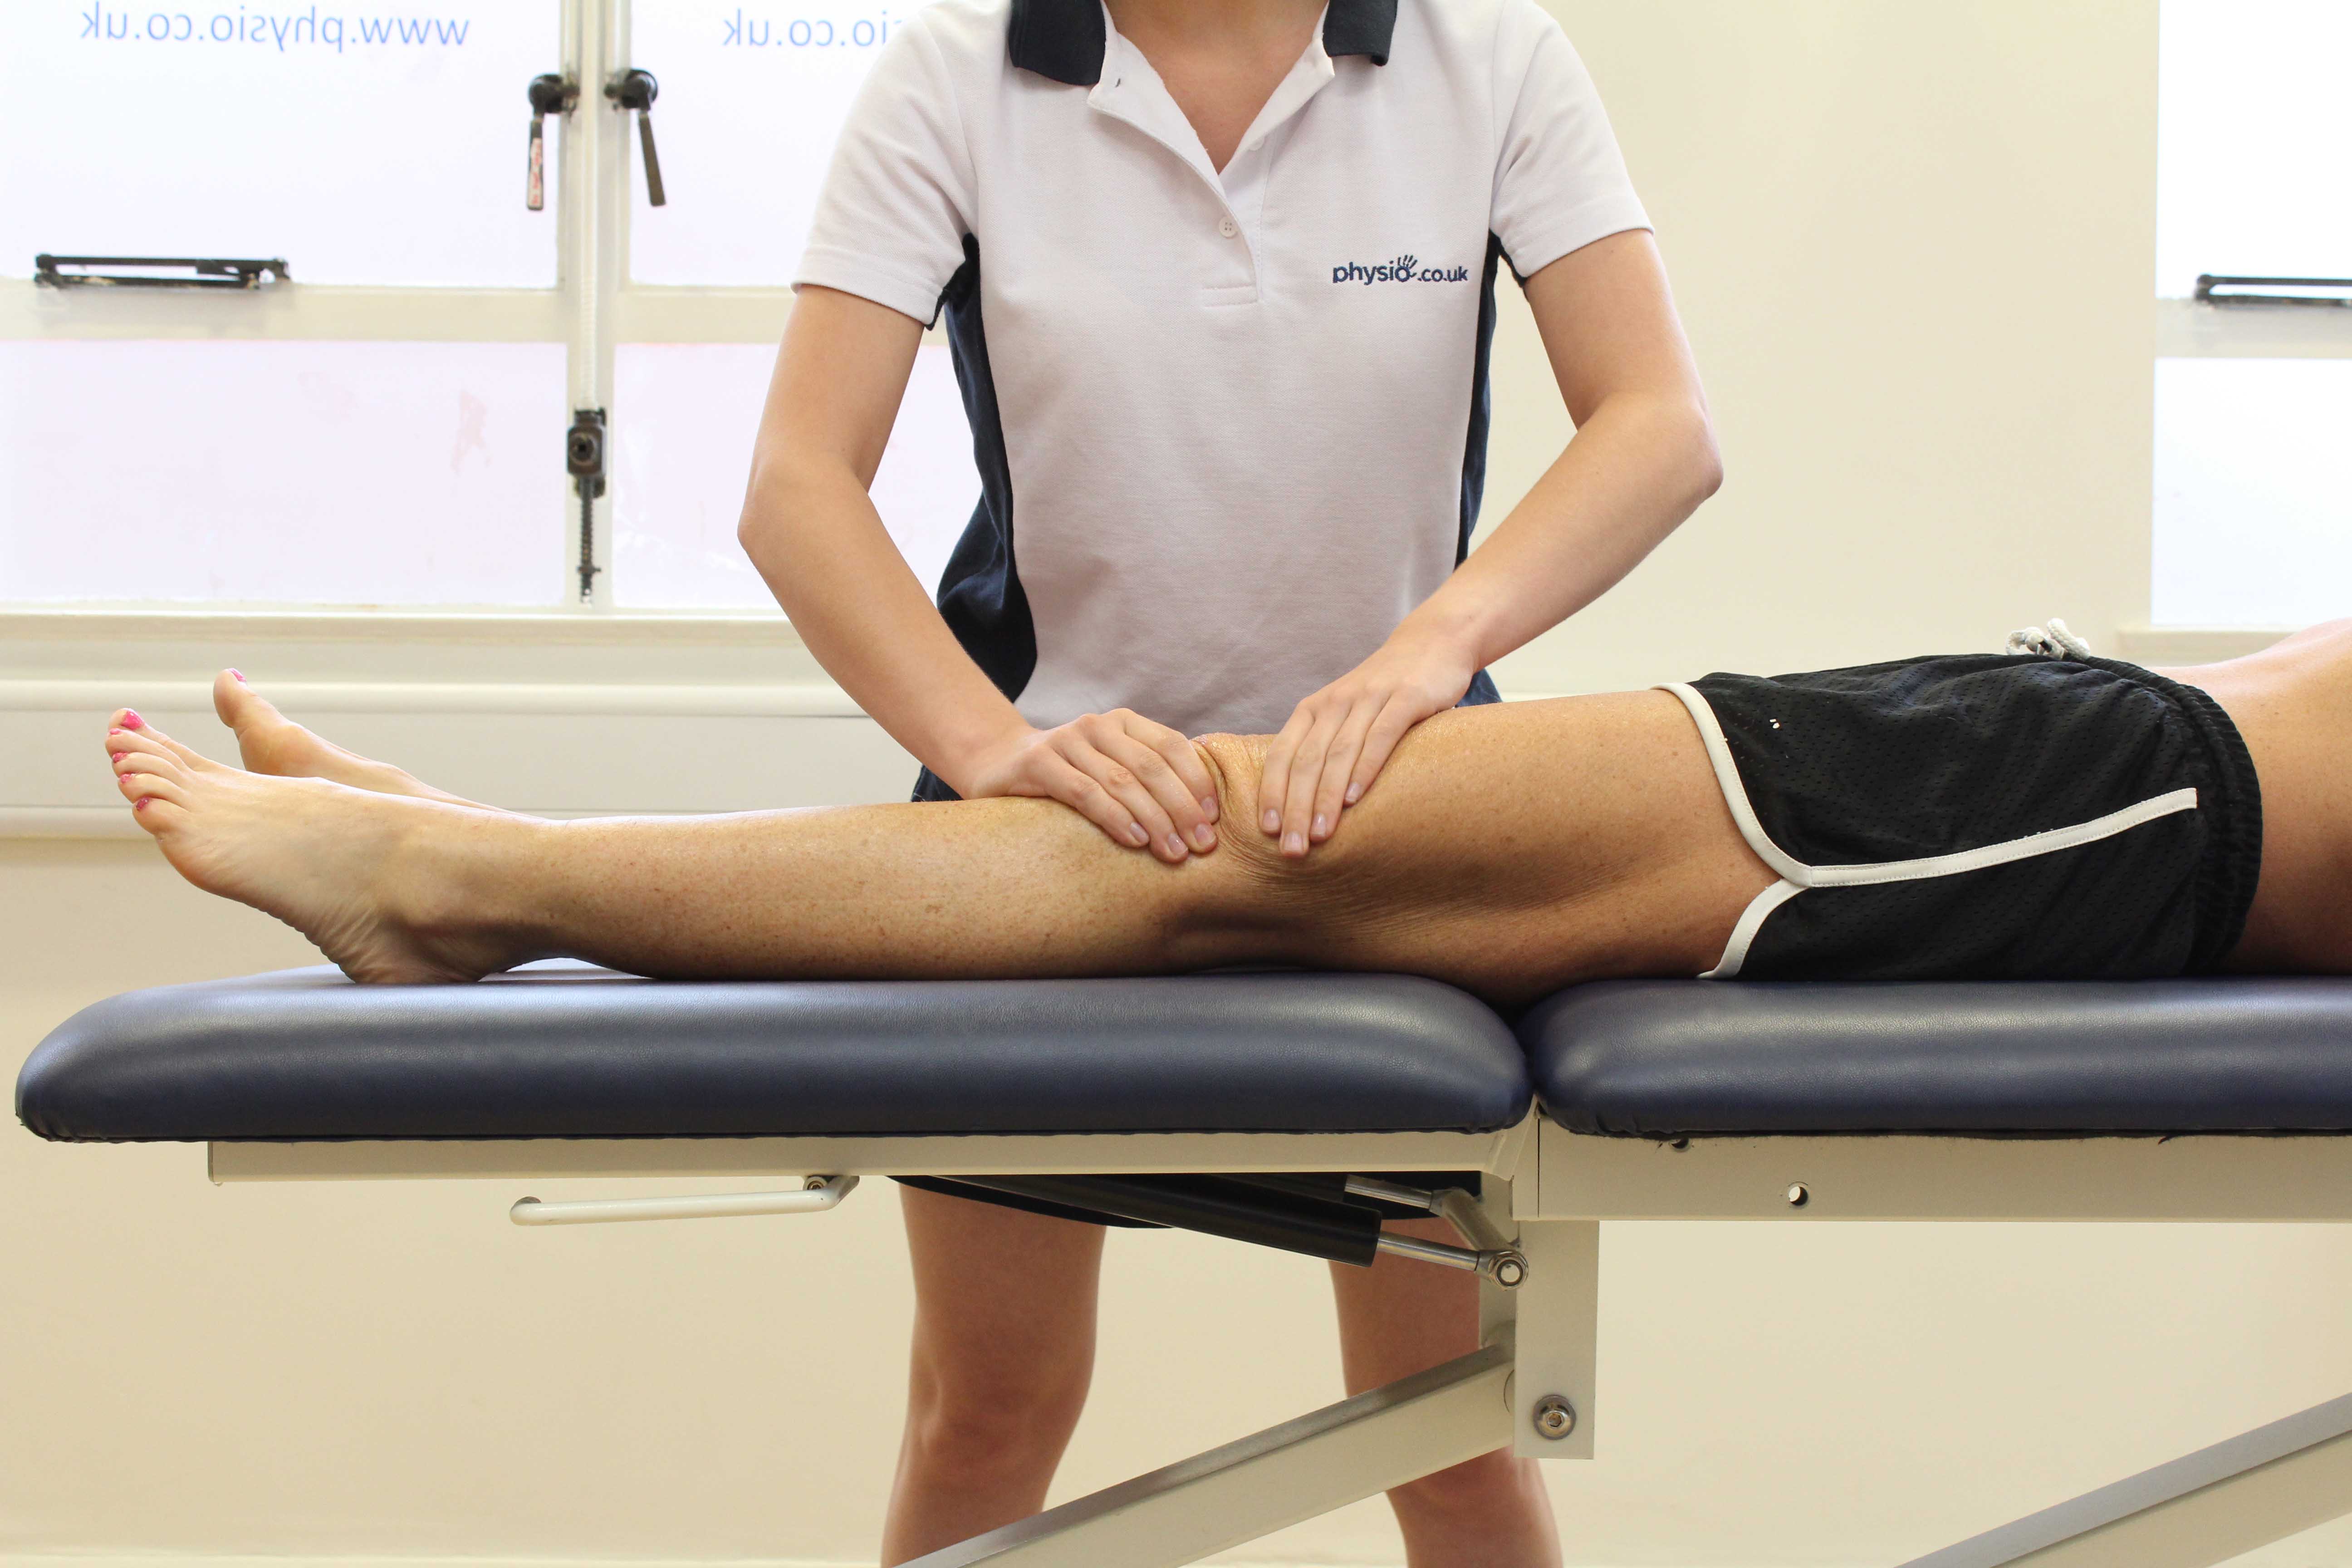 Rolling massage technique applied to patella femoral joint to releive pain